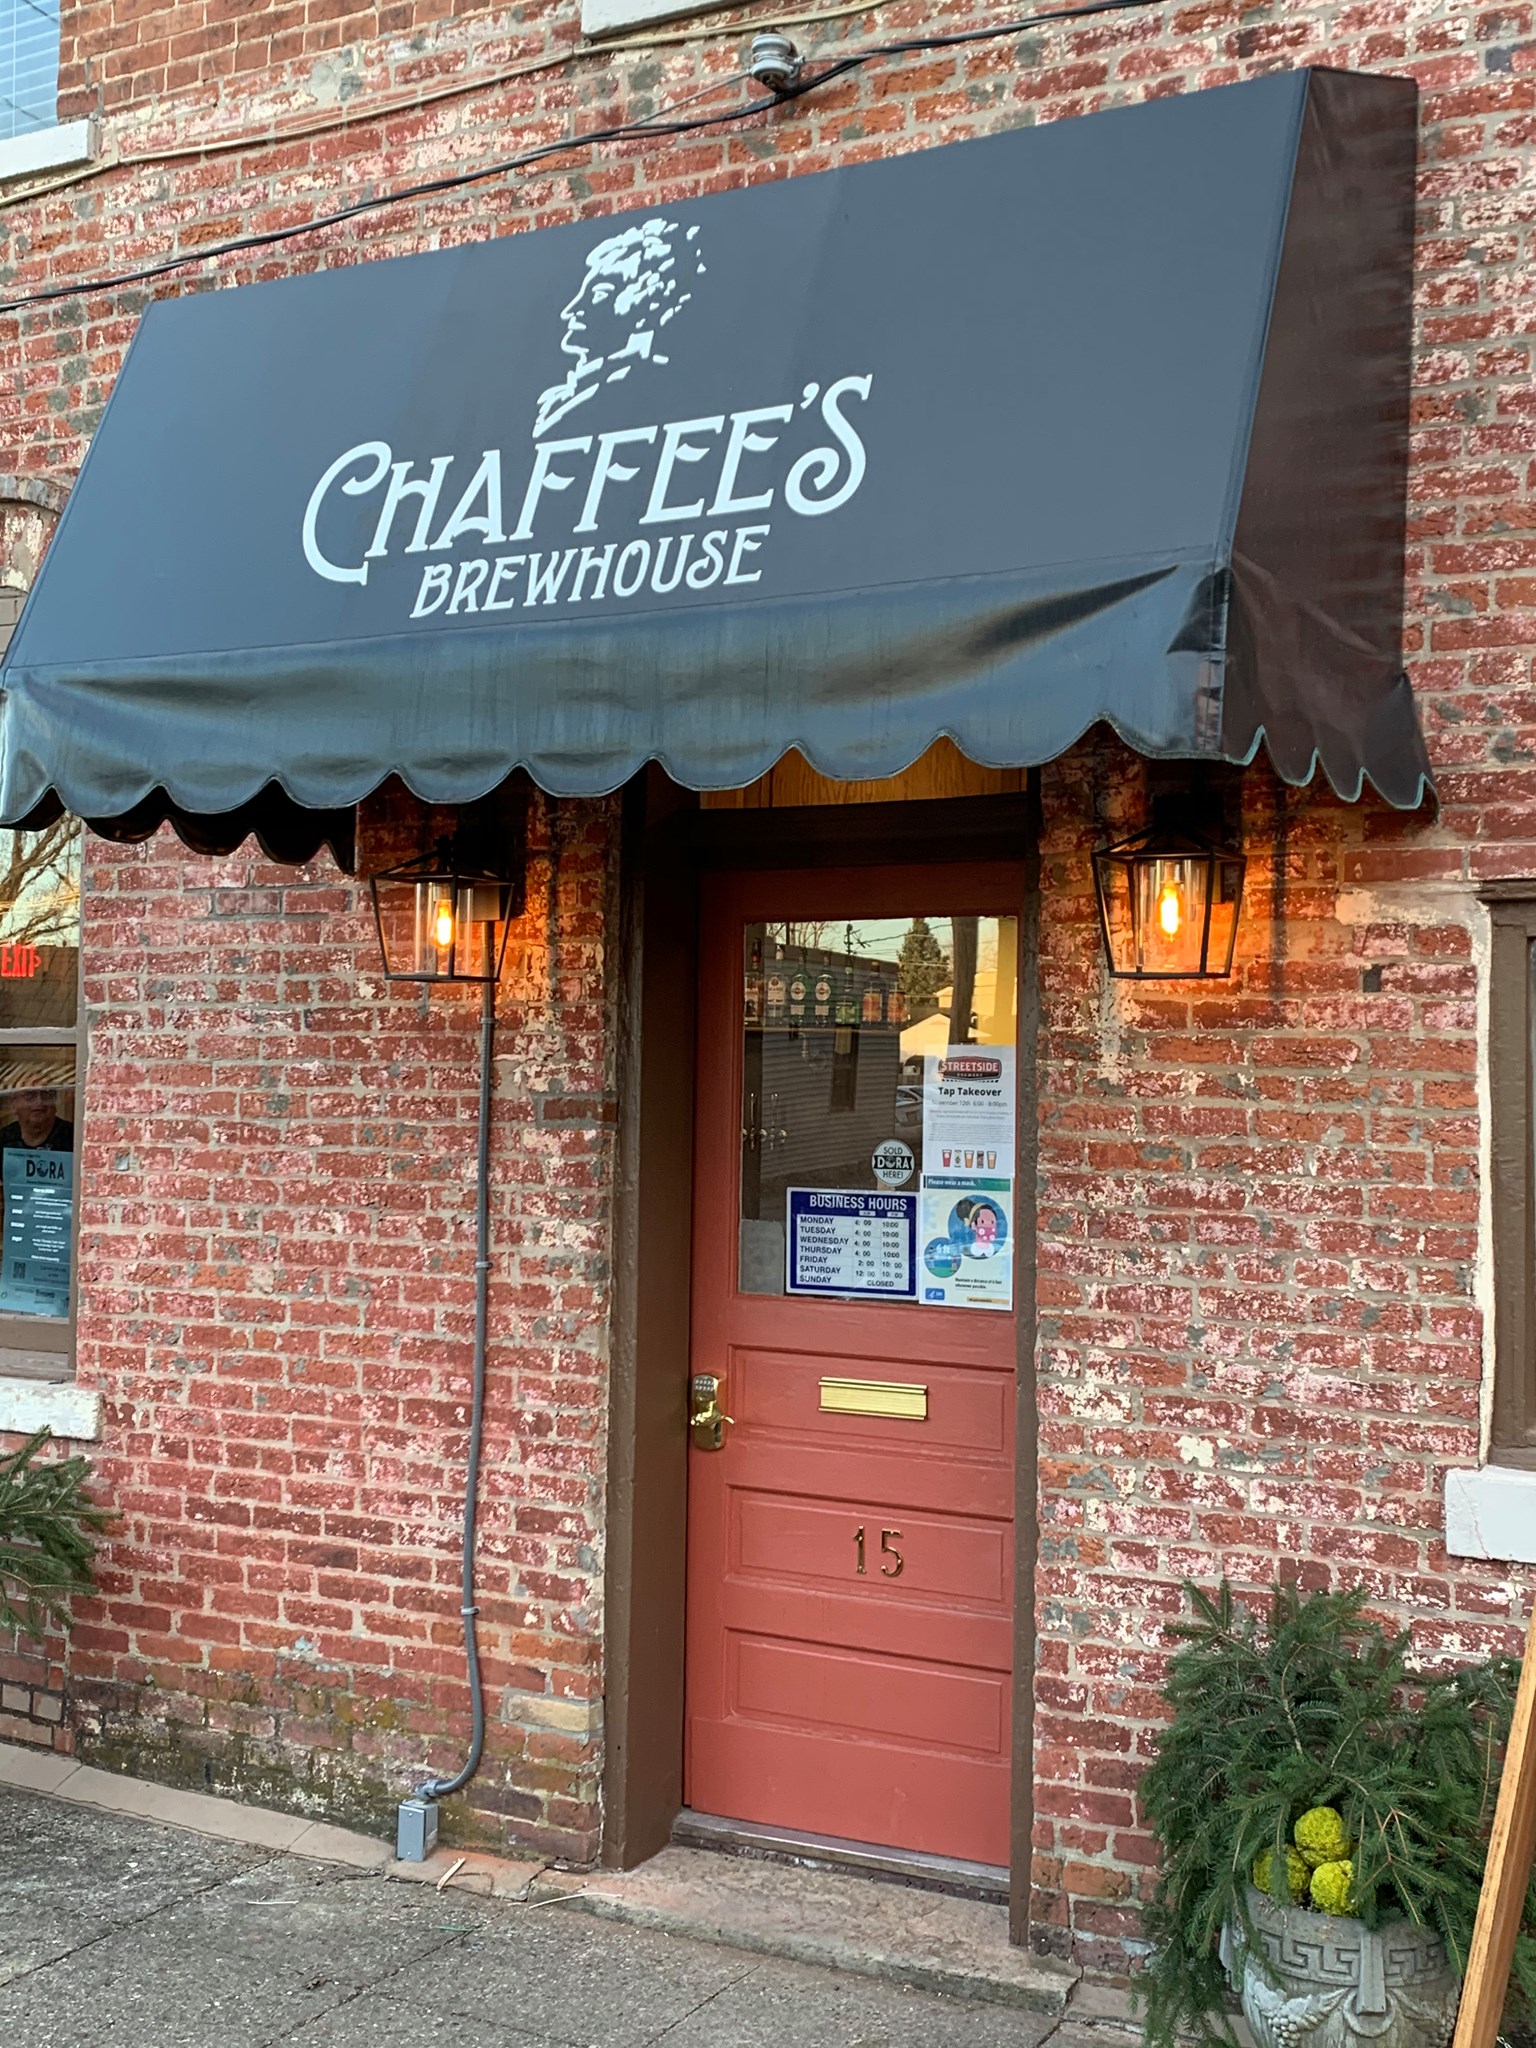 Chaffee's Brewhouse